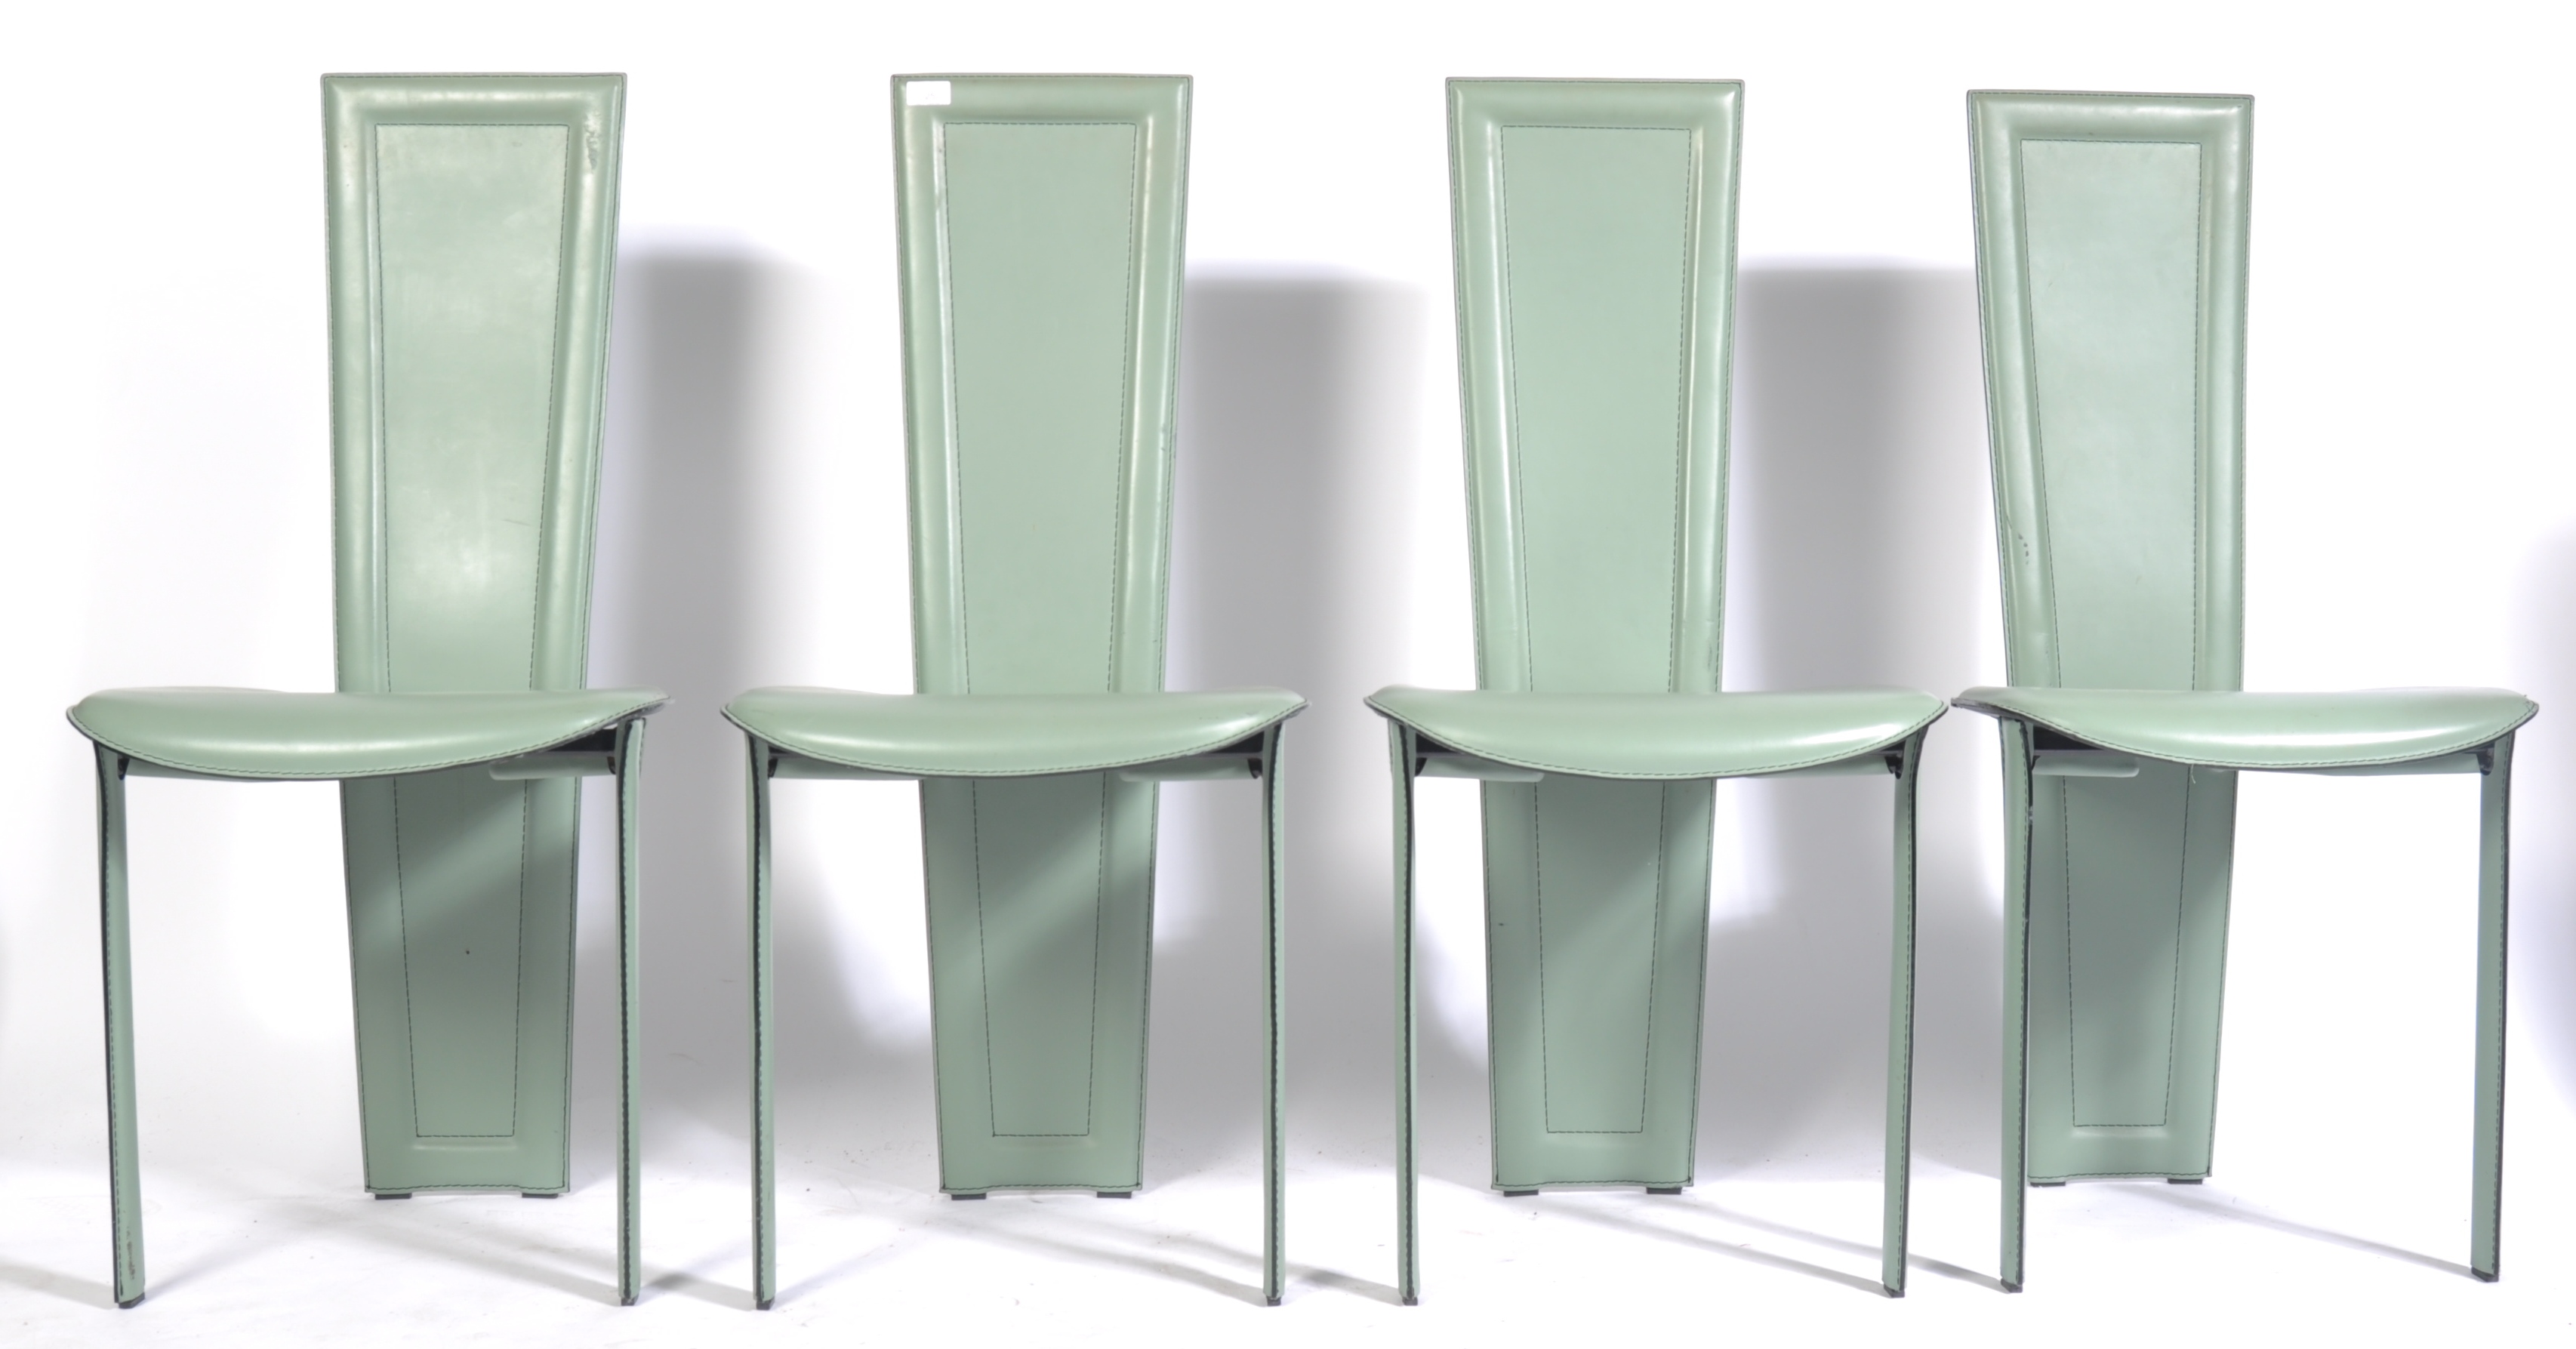 QUIA ITALIAN MINT GREEN LEATHER DINING CHAIRS - Image 4 of 8